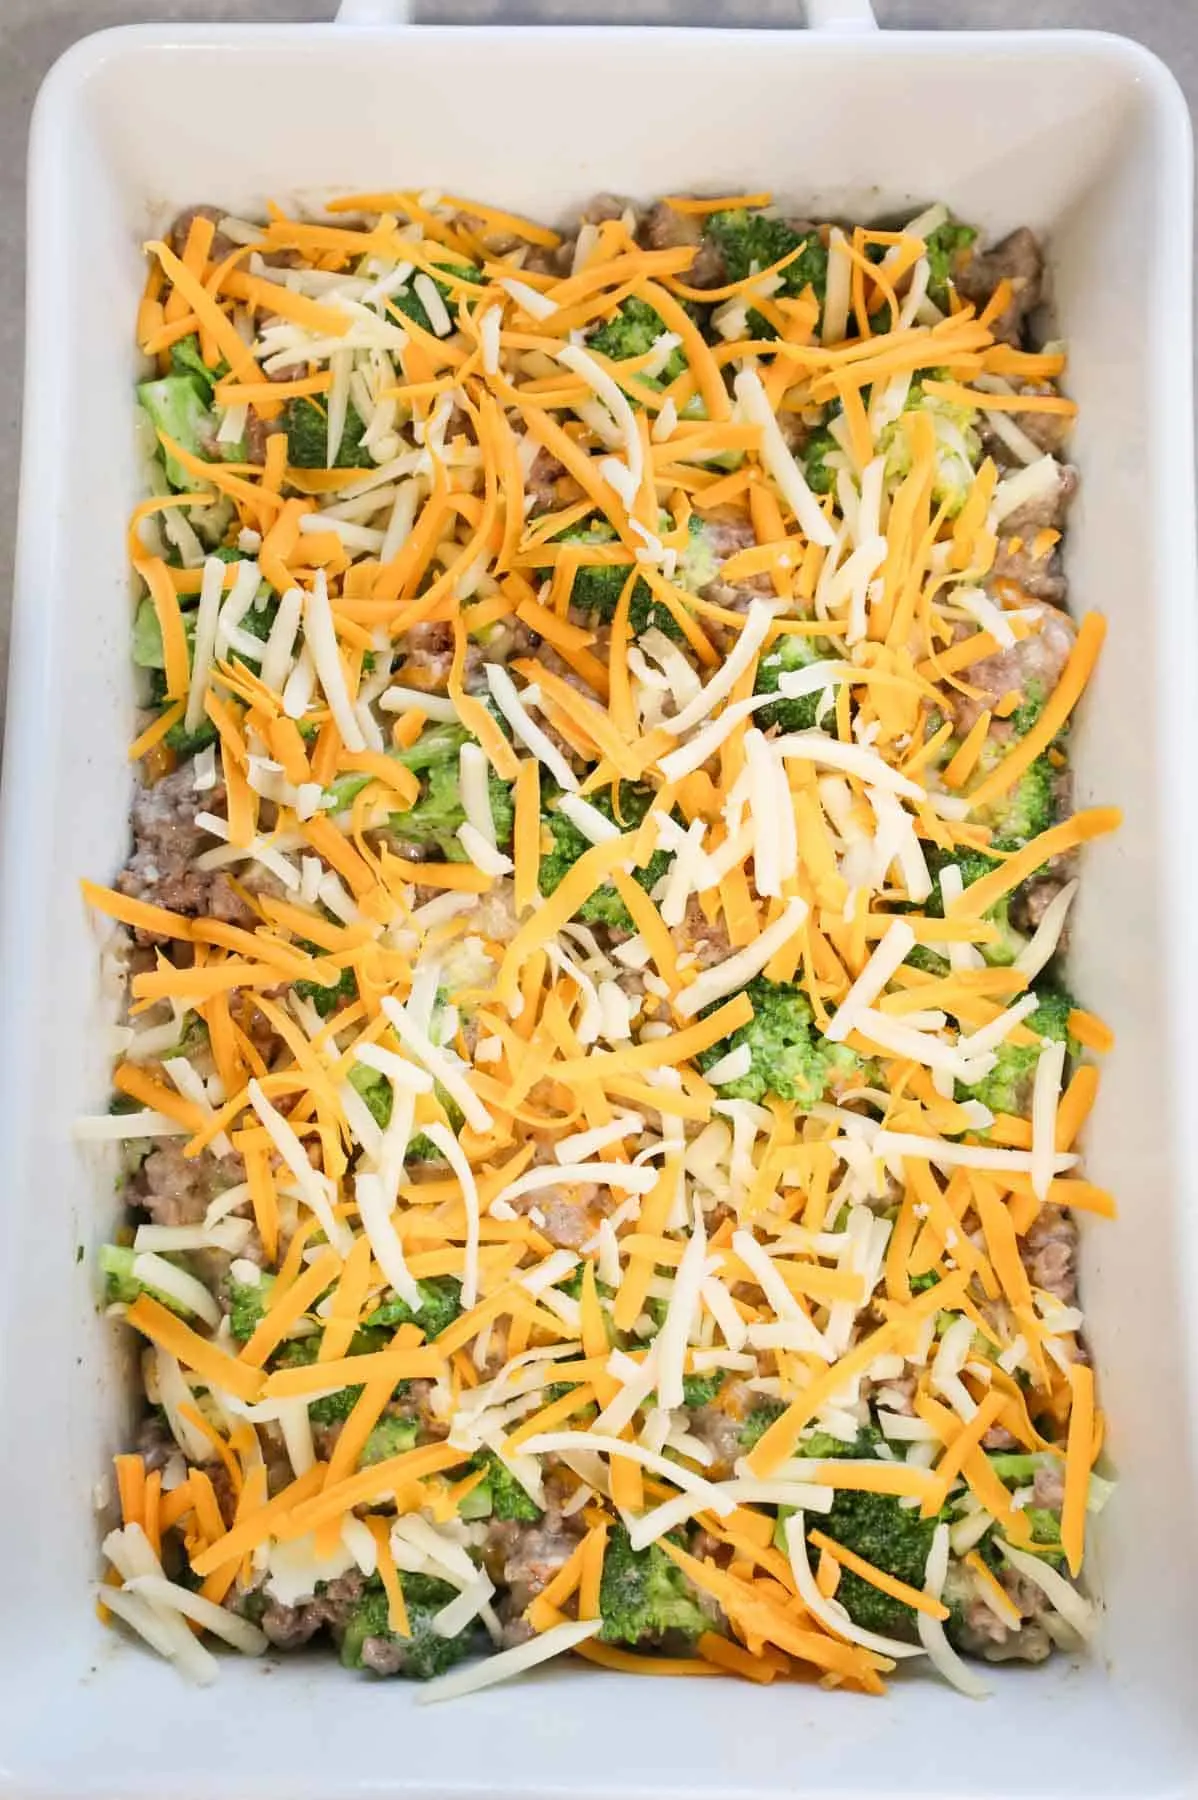 shredded mozzarella and shredded cheddar on top of ground beef and broccoli mixture in casserole dish